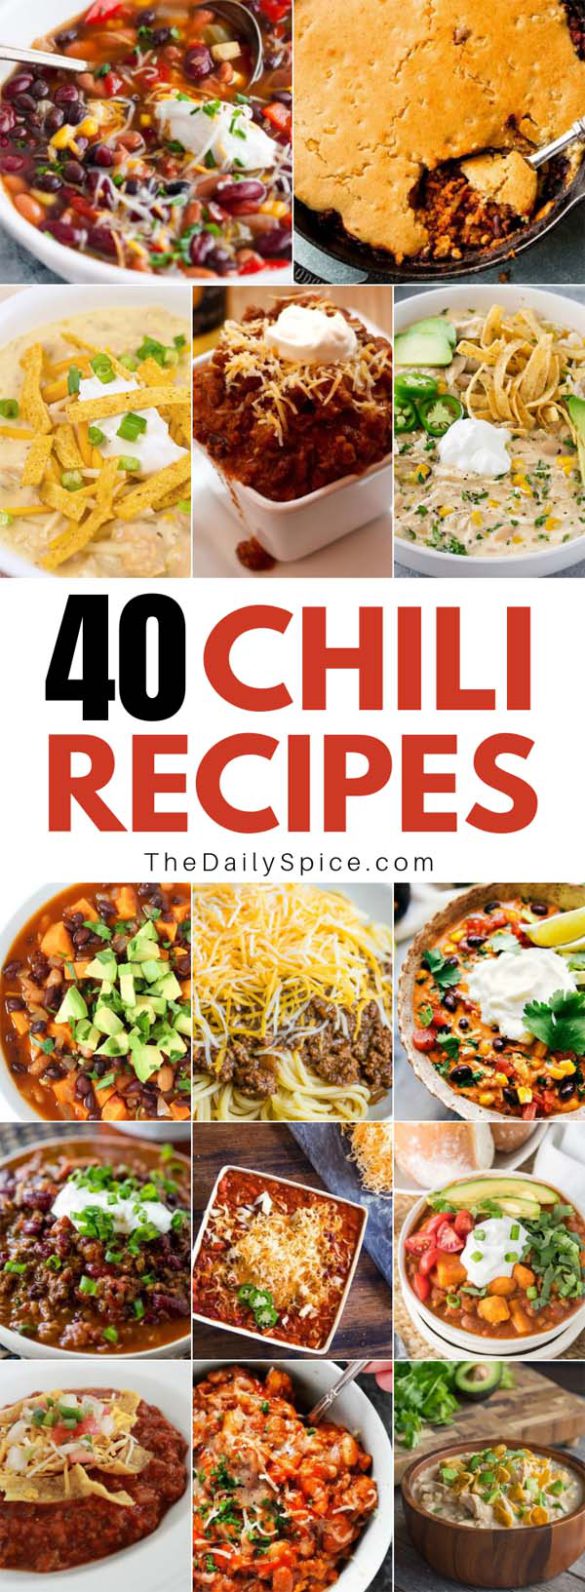 40 Easy Chili Recipes To Keep You Warm This Winter - The Daily Spice